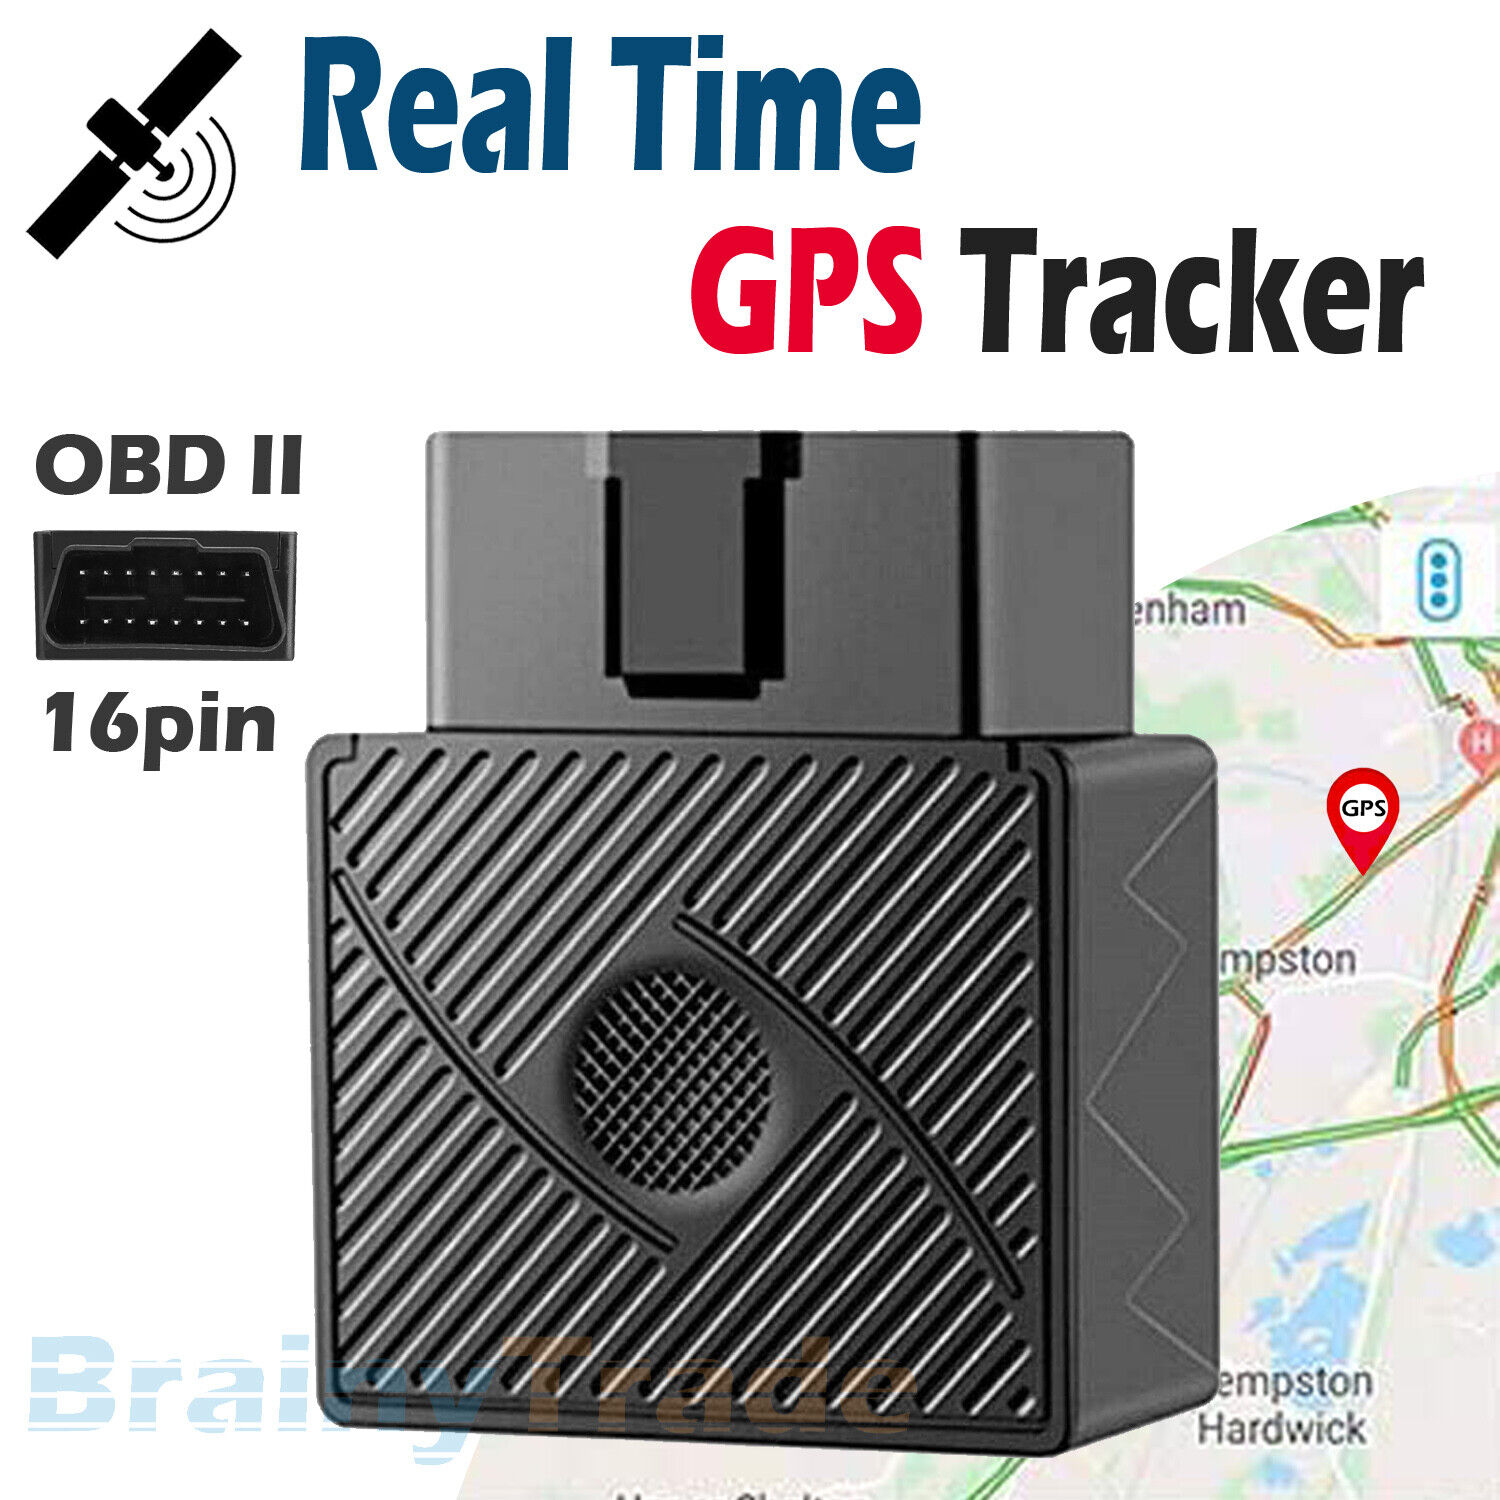 OBD II GPS Tracker Real-Time OBD2 Vehicle Car Truck Tracking Device Locator